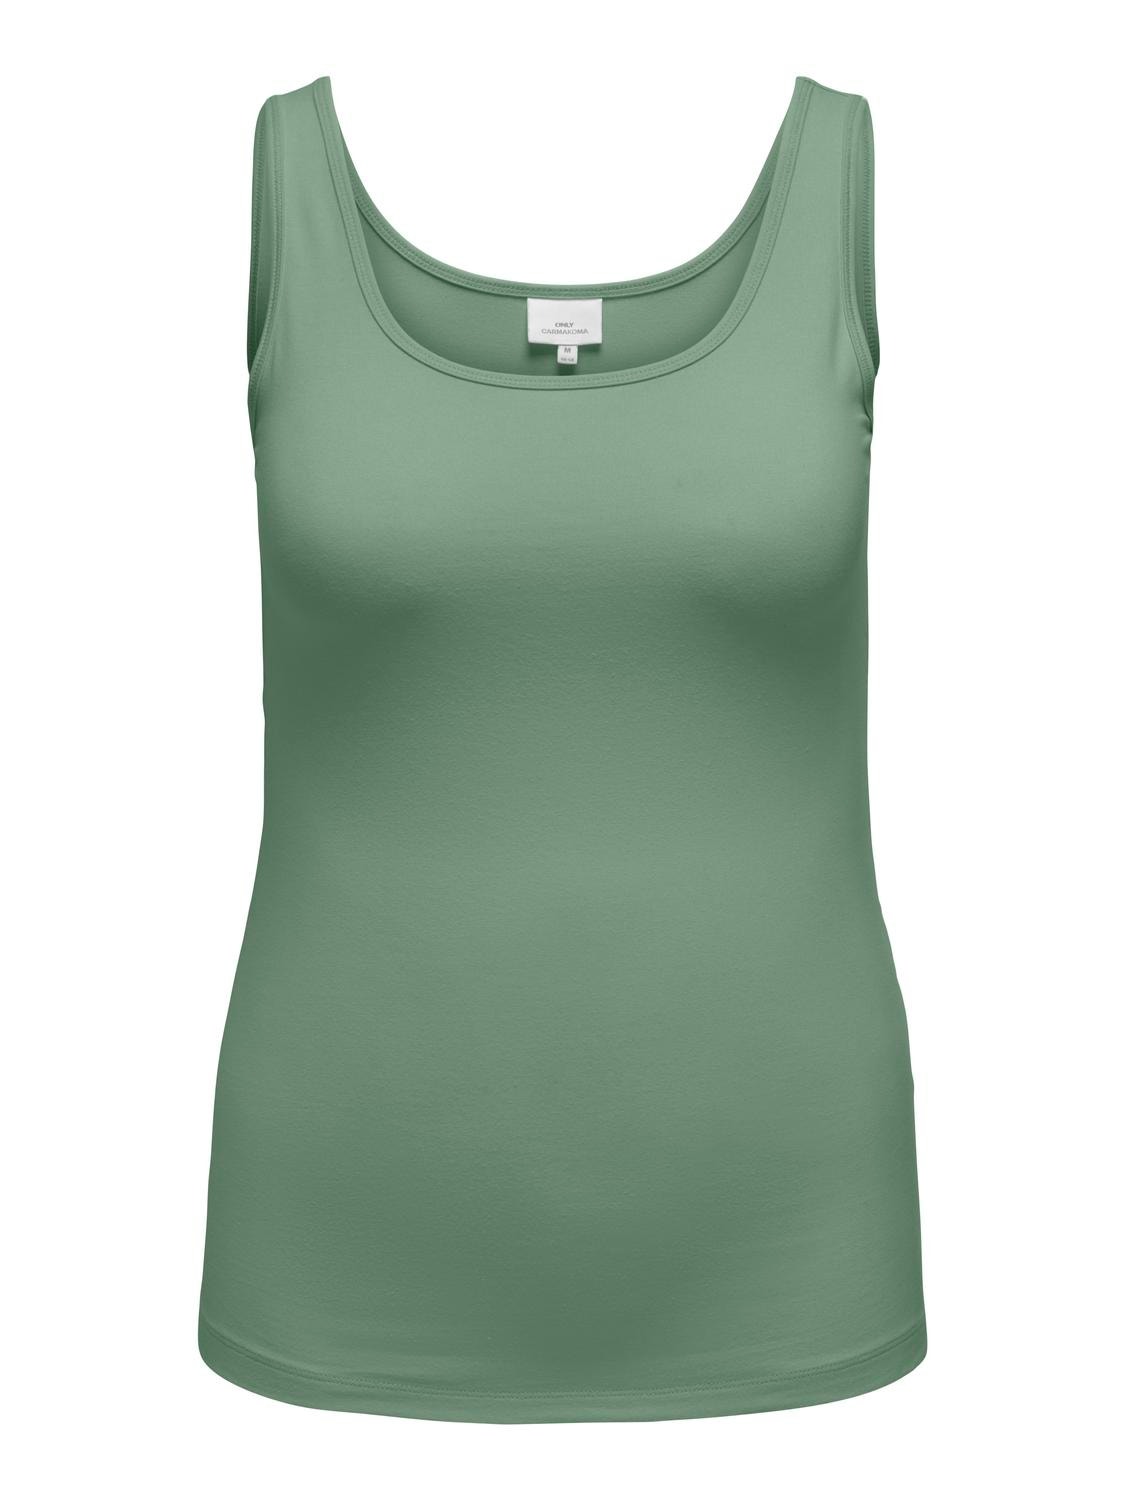 ONLY Curvy basic Tank top -Hedge Green - 15188036